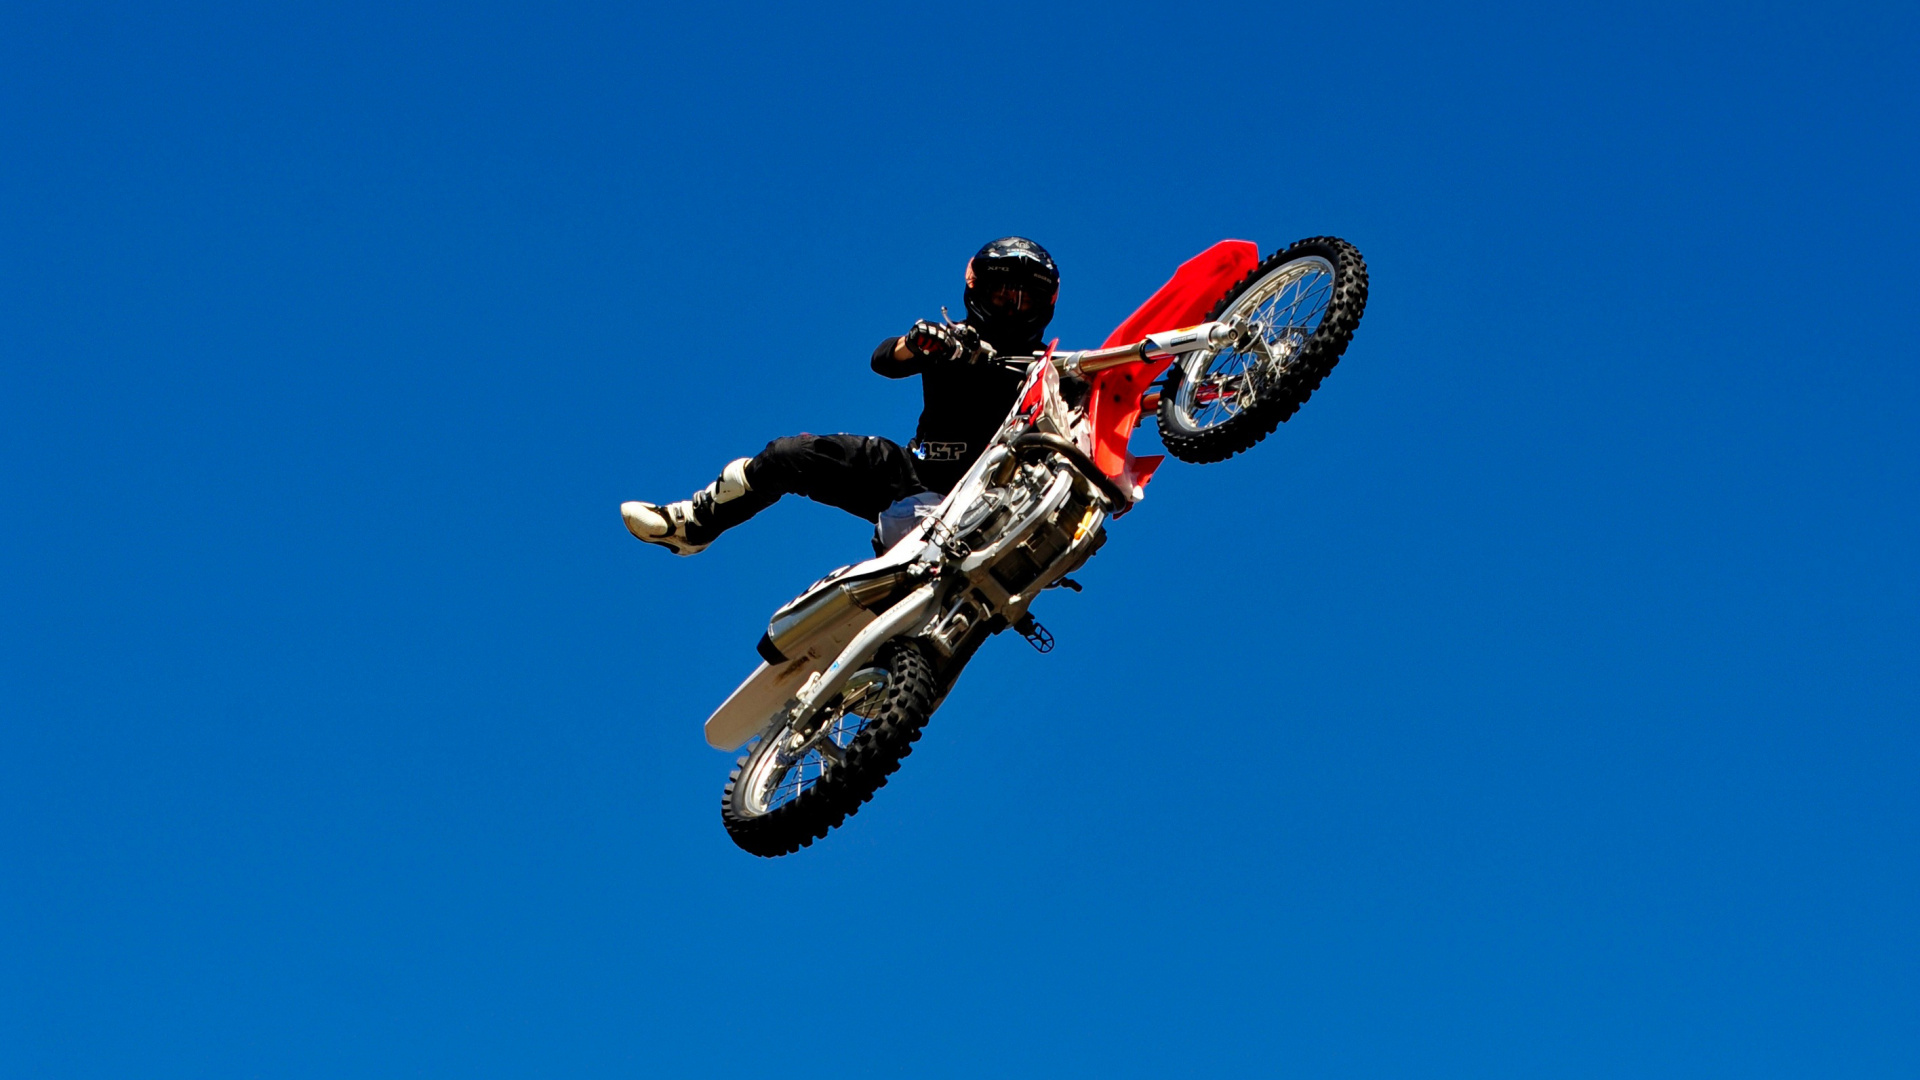 Man in Red and Black Motocross Suit Riding Red and White Motocross Dirt Bike. Wallpaper in 1920x1080 Resolution